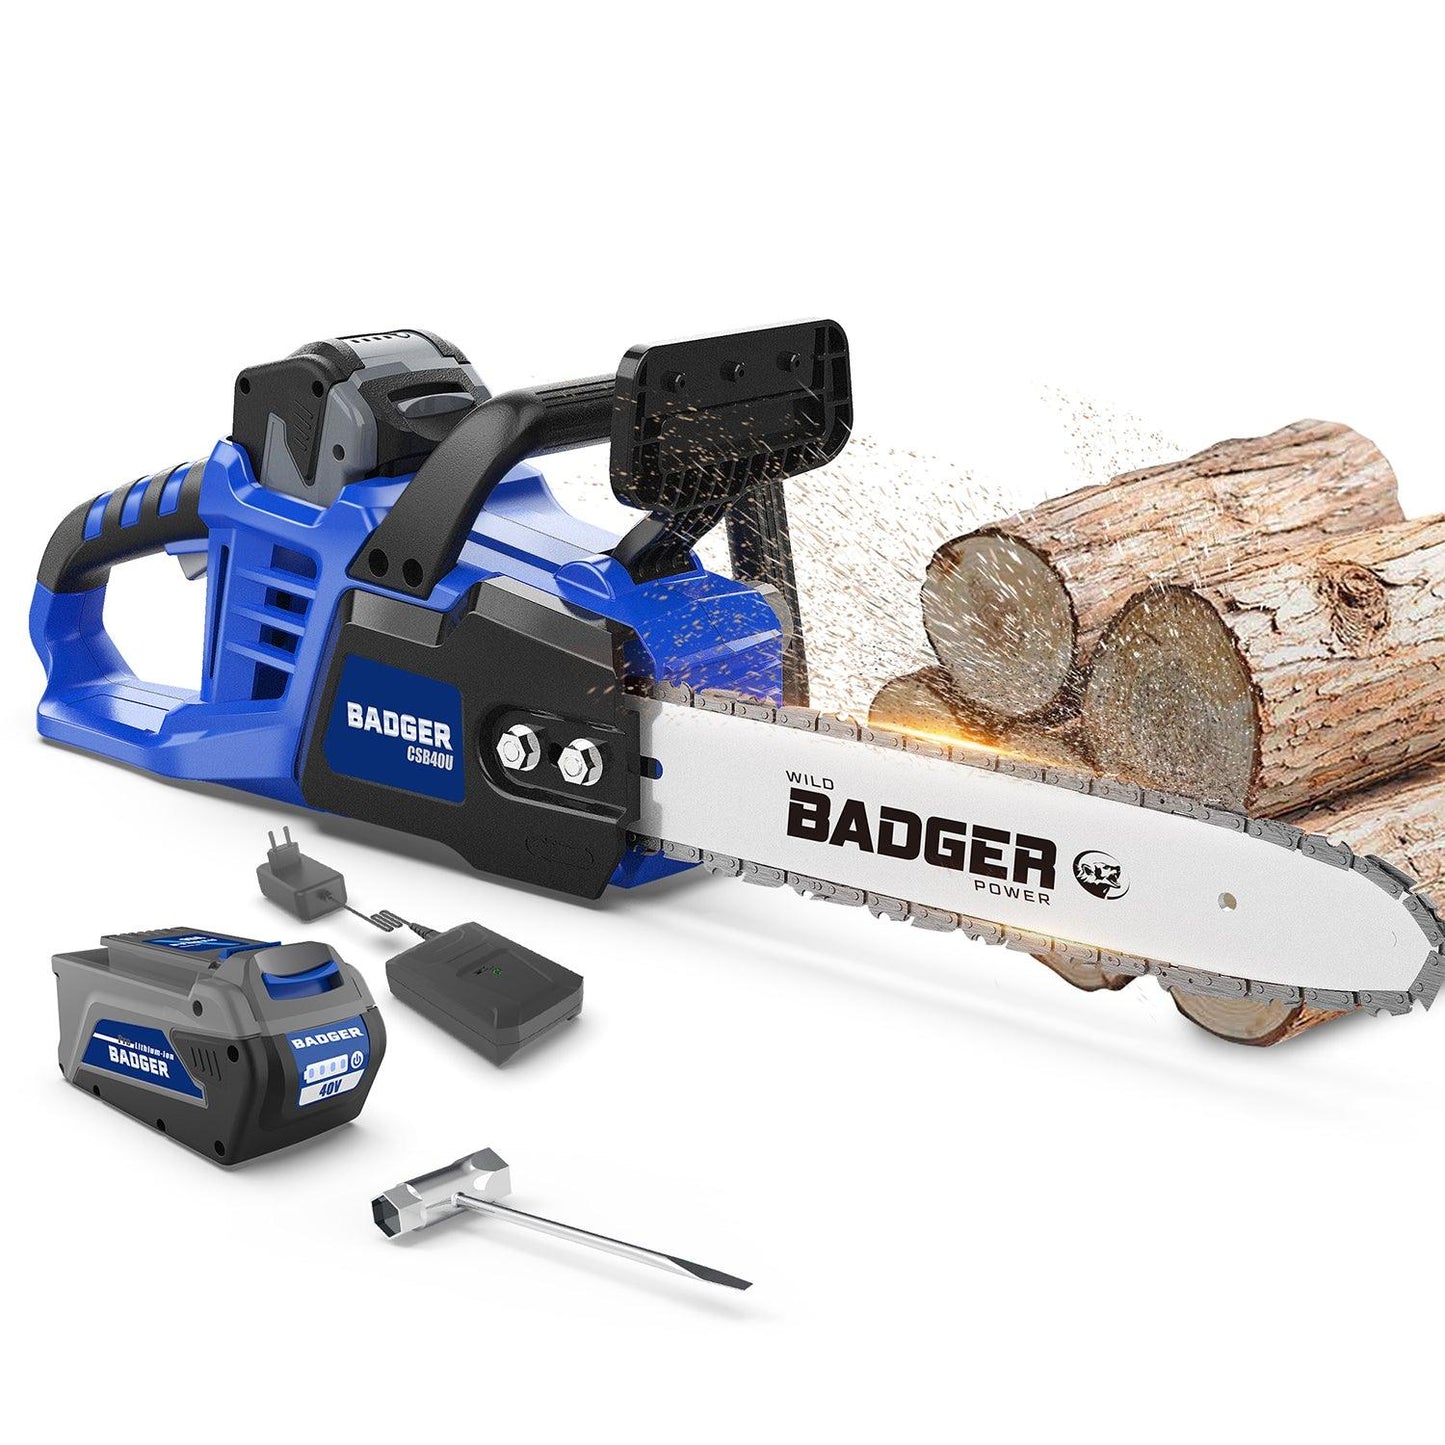 
                  
                    WILD BADGER POWER 40v 16" Cordless Electric Chainsaw Brushless, 4.0 Ah Battery & Charger, Blue
                  
                